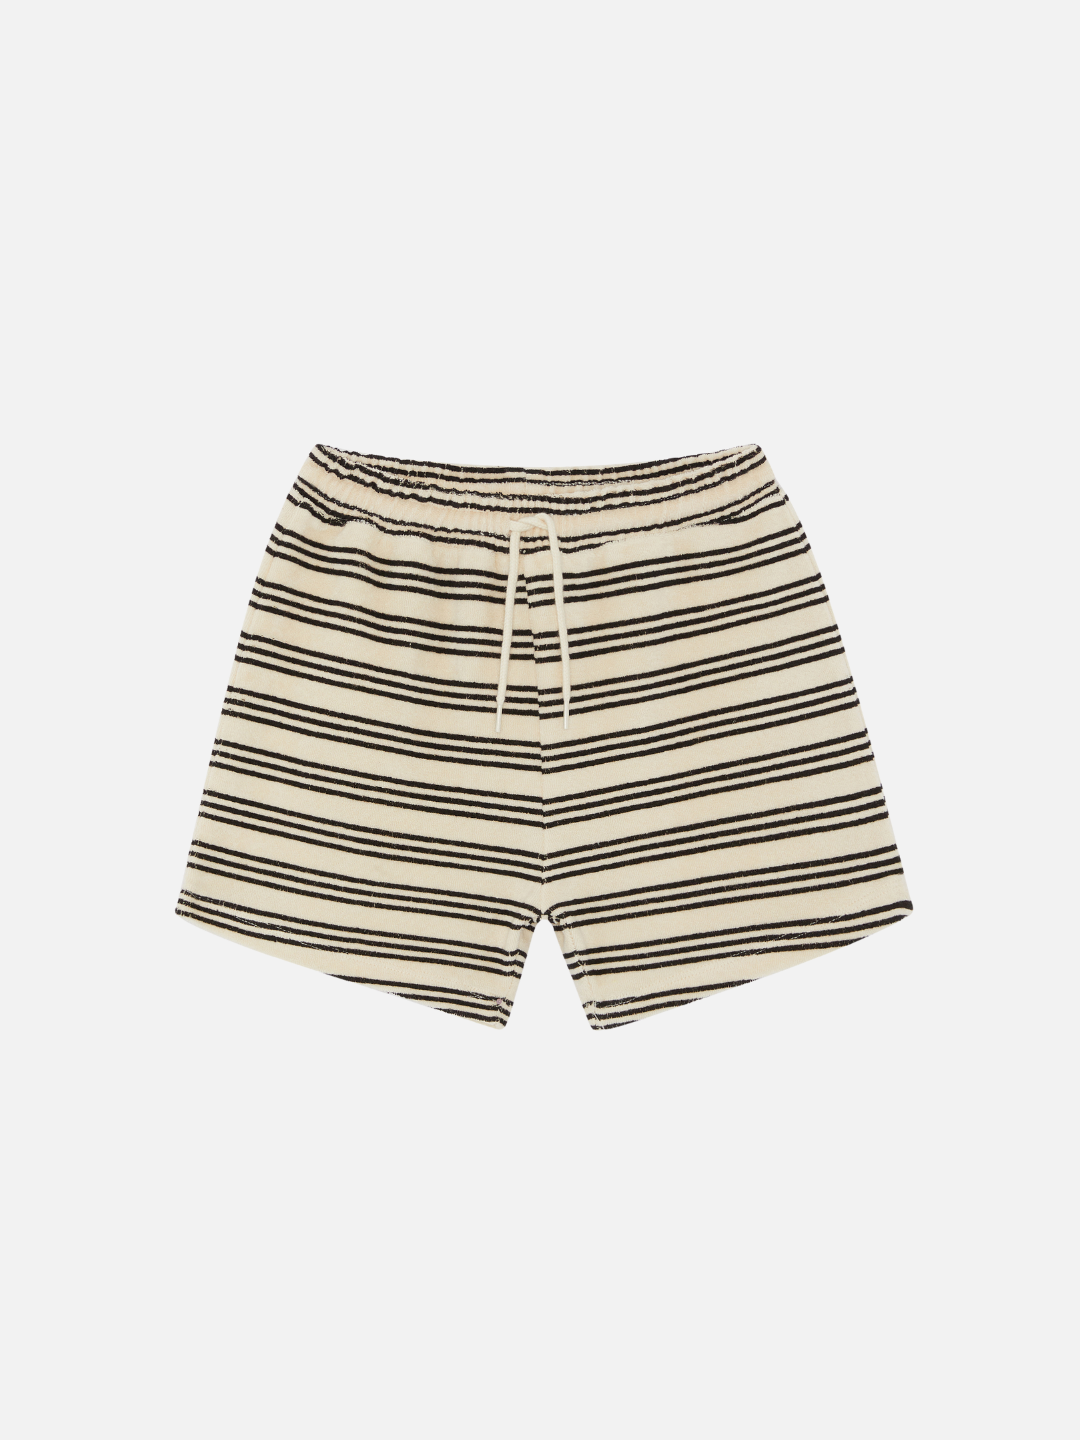 Stripe | A front view of the kid's terry towel shorts in stripe